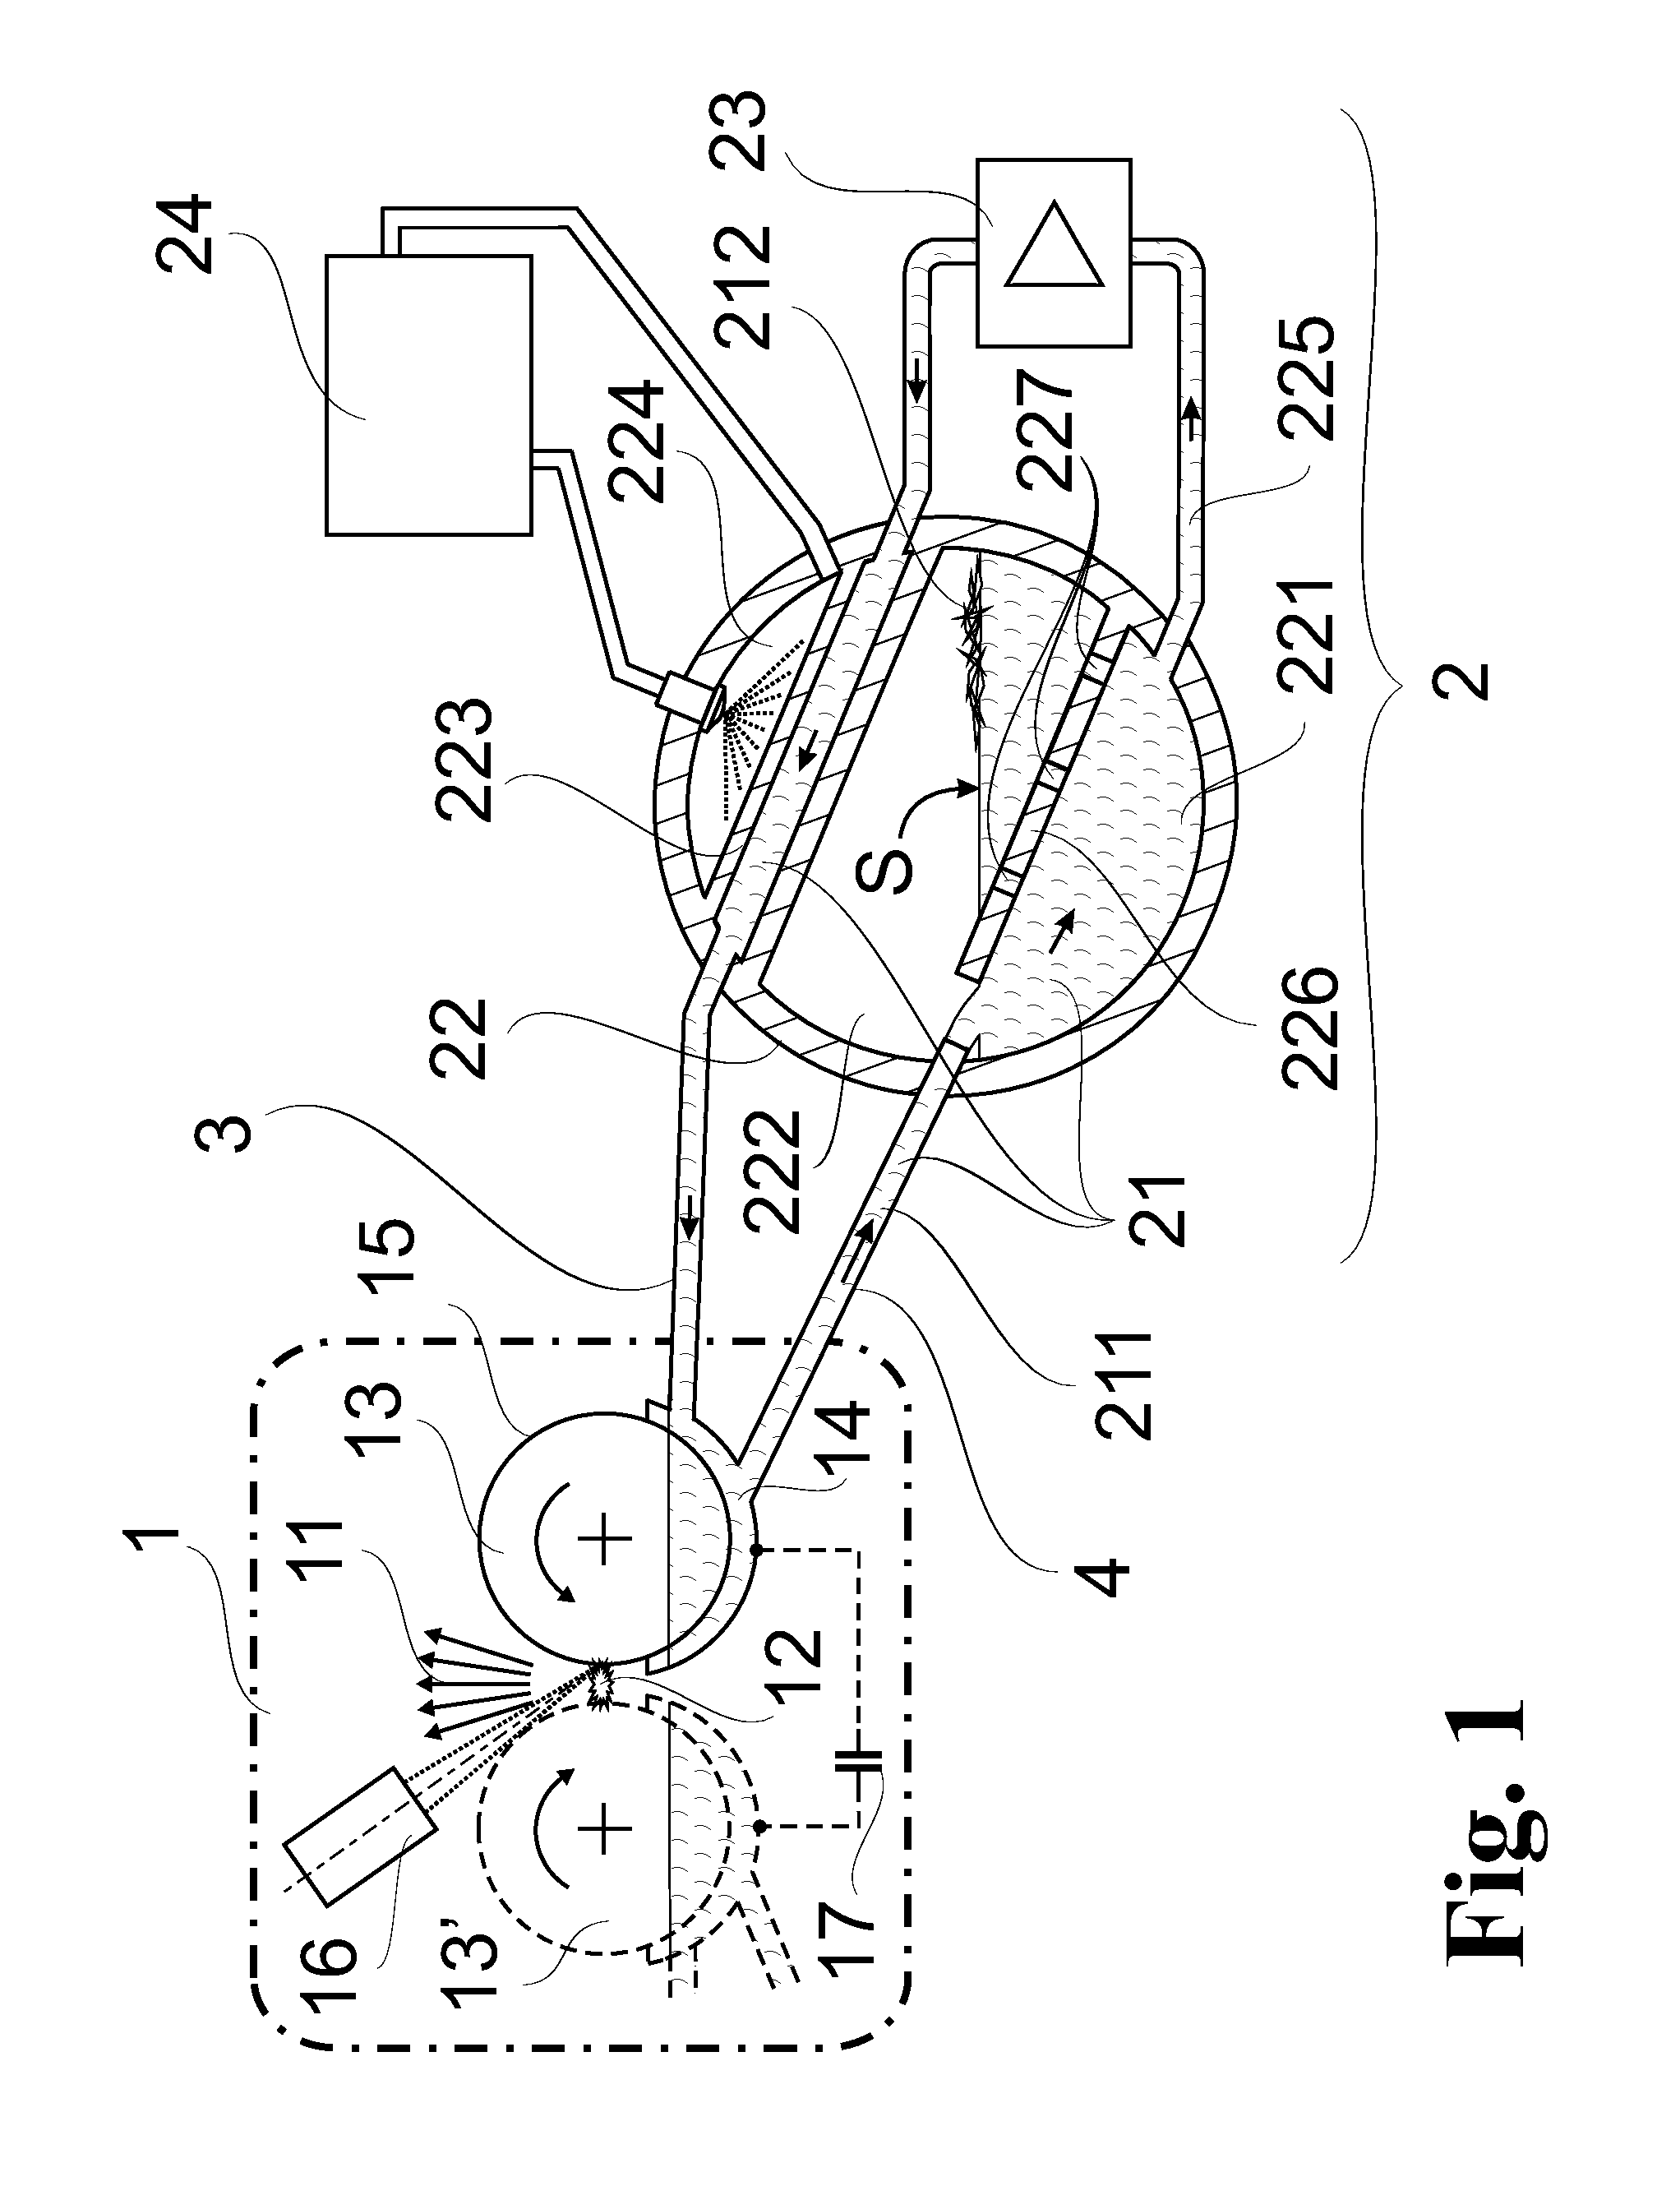 Arrangement for the handling of a liquid metal for cooling revolving components of a radiation source based on a radiation-emitting plasma